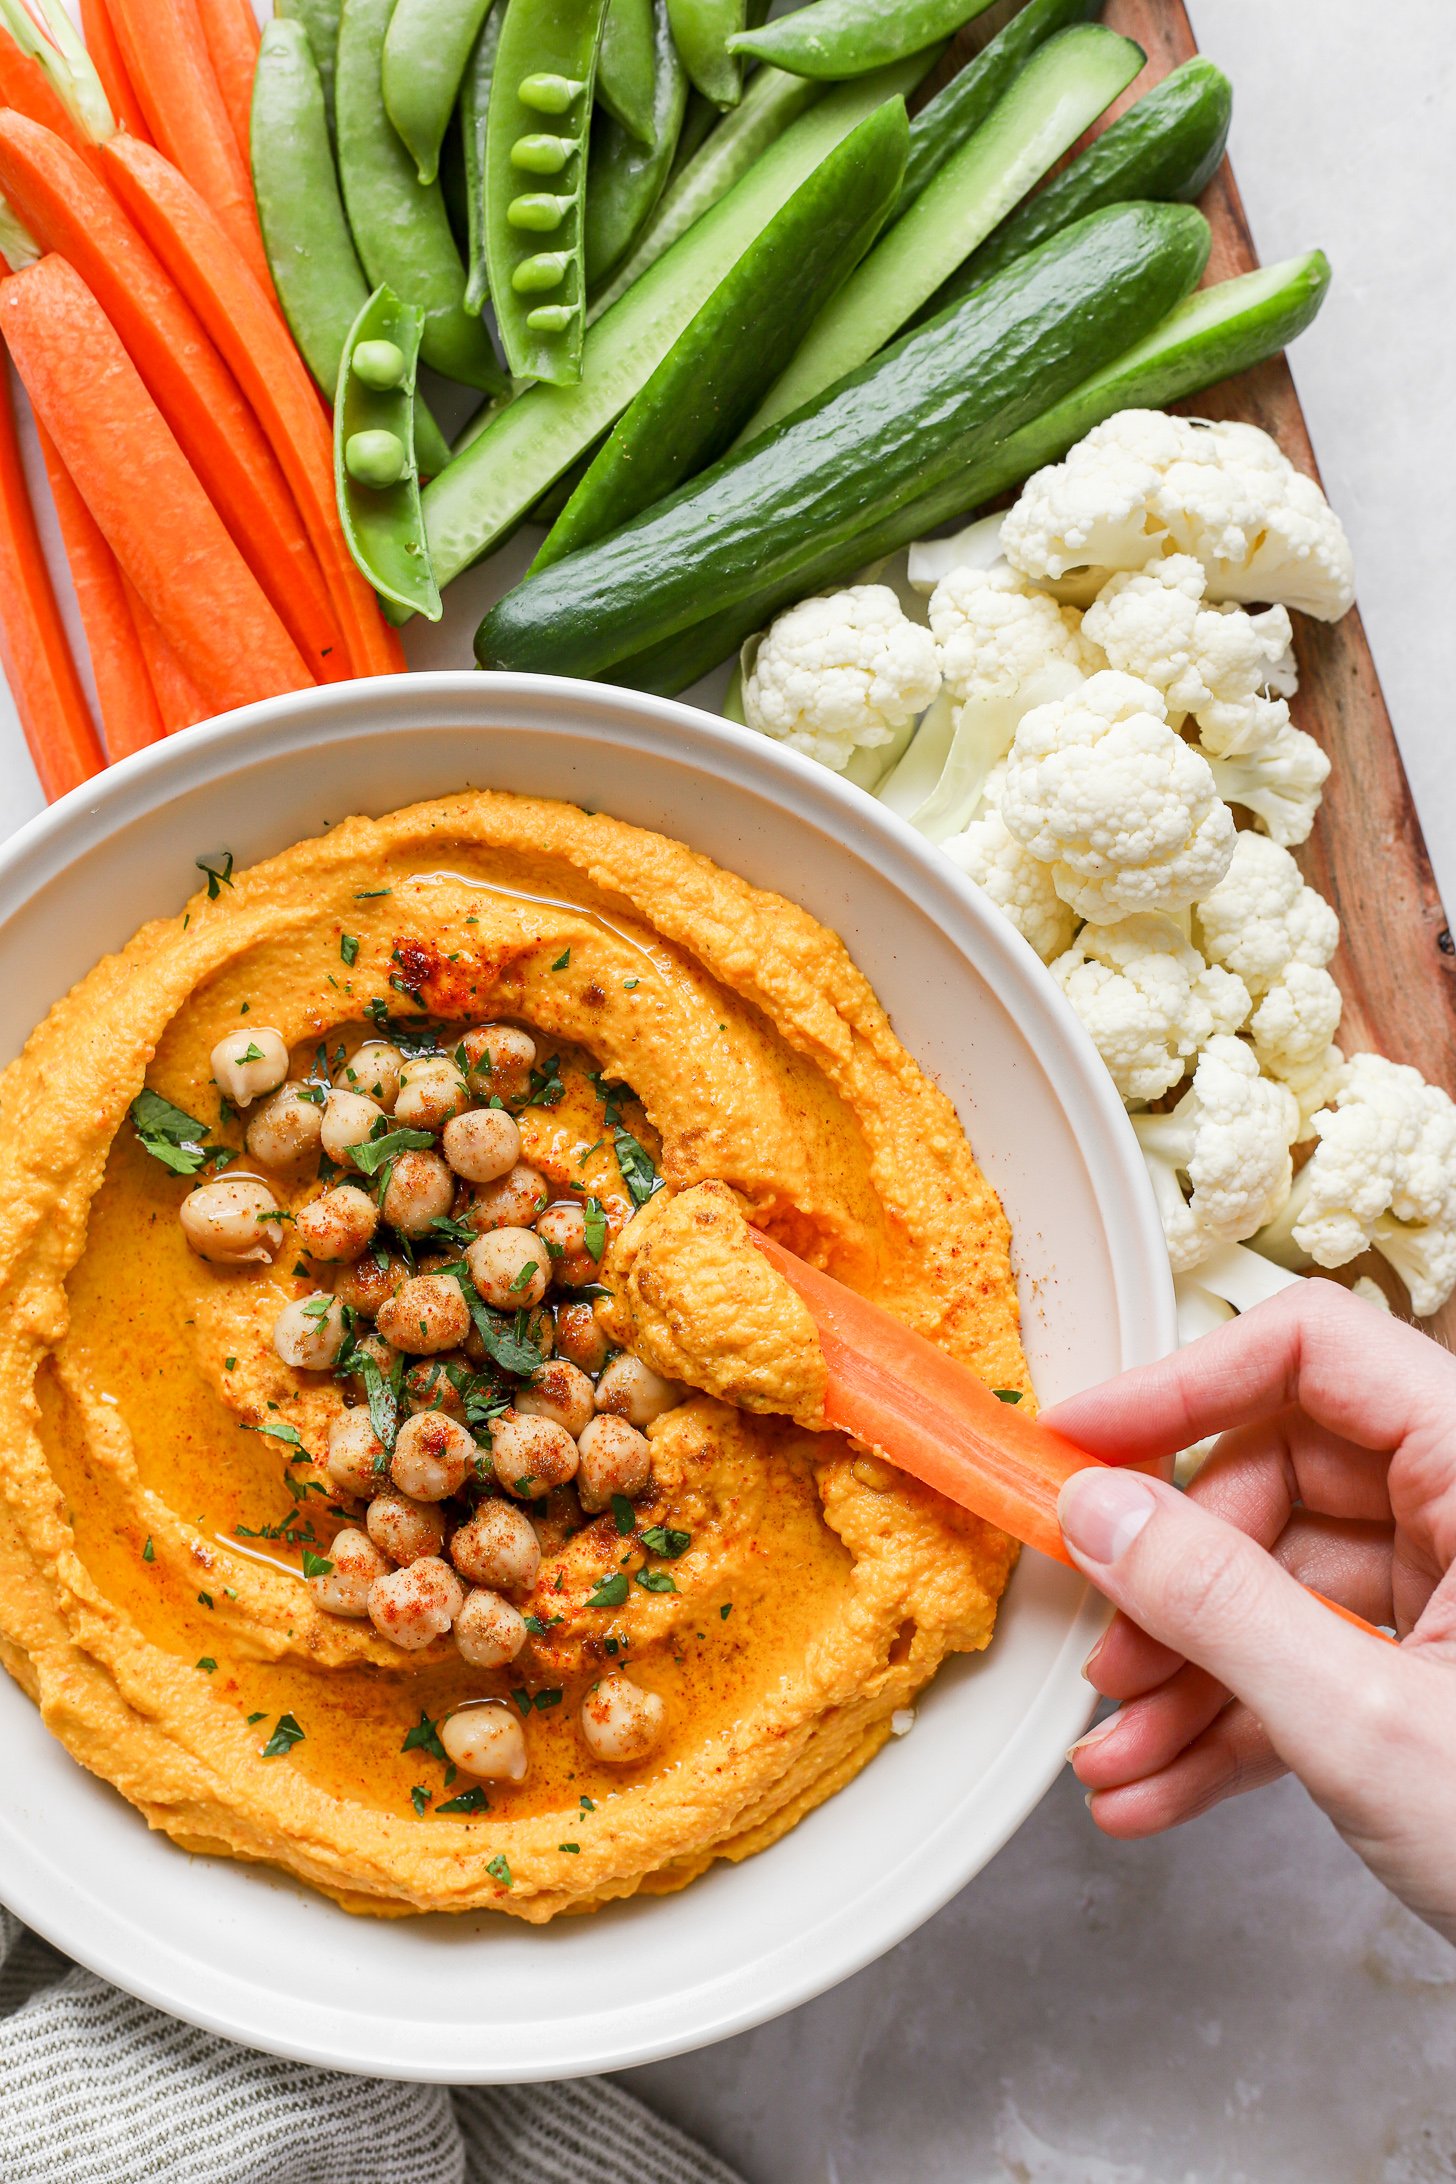 Roasted carrot in a white bowl topped with chickpeas and fresh herbs. A hand is dipping a carrot stick in the hummus and the bowl is surrounded by other sliced veggies, like cauliflower florets, sliced cucumbers, sugar snap peas and more carrot sticks.